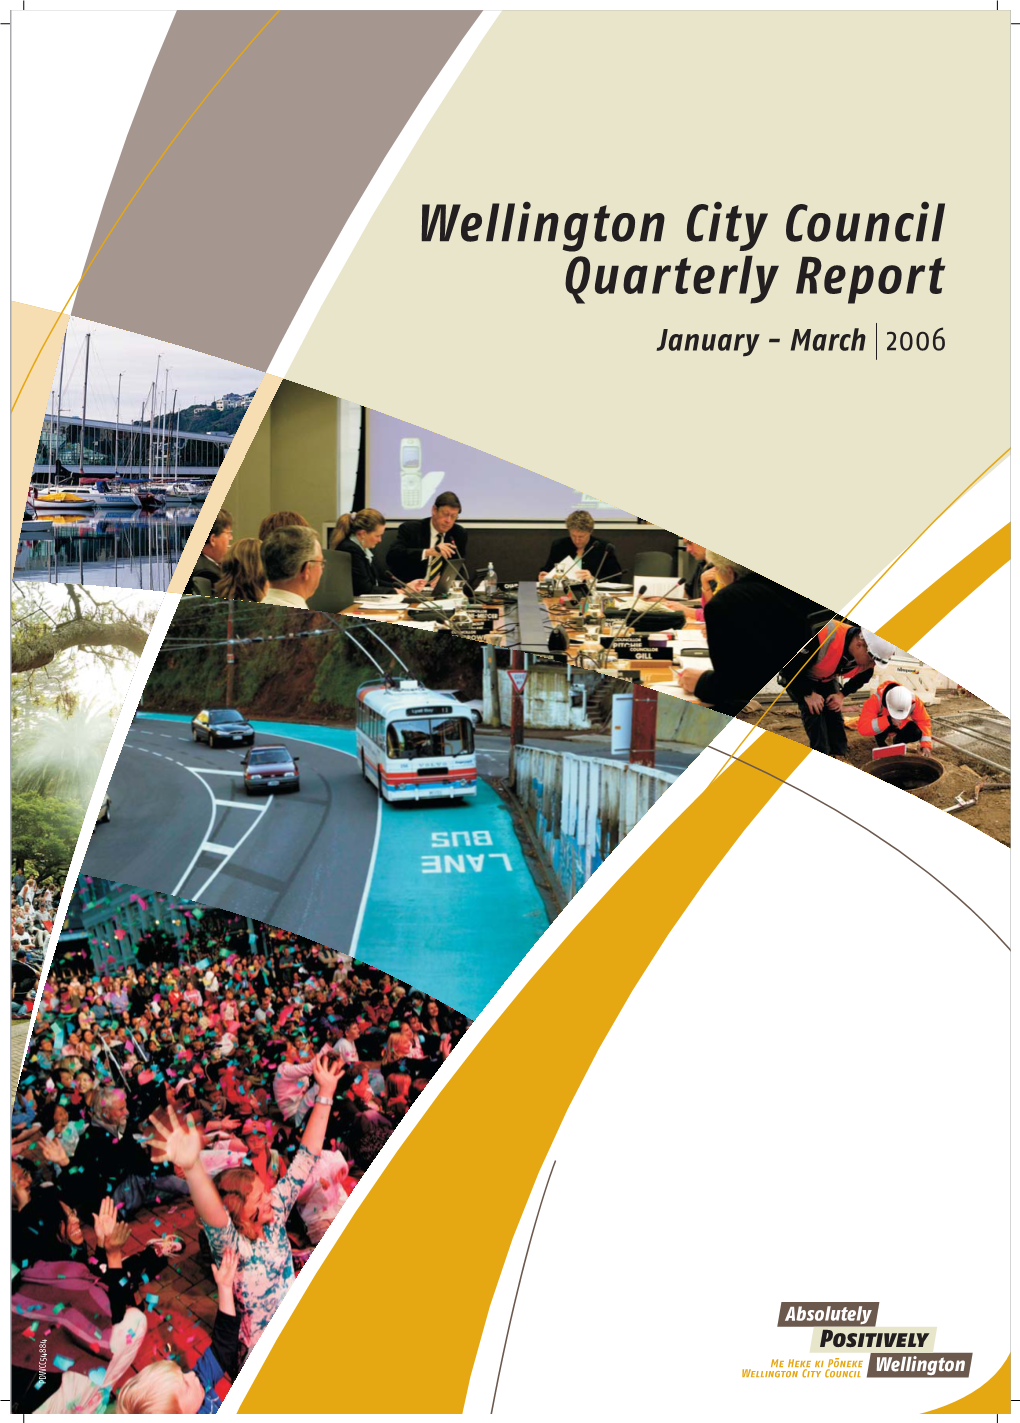 Wellington City Council Quarterly Report January - March 2006 PDWCC54884 a MESSAGE from the CHIEF EXECUTIVE a Message from the Chief Executive